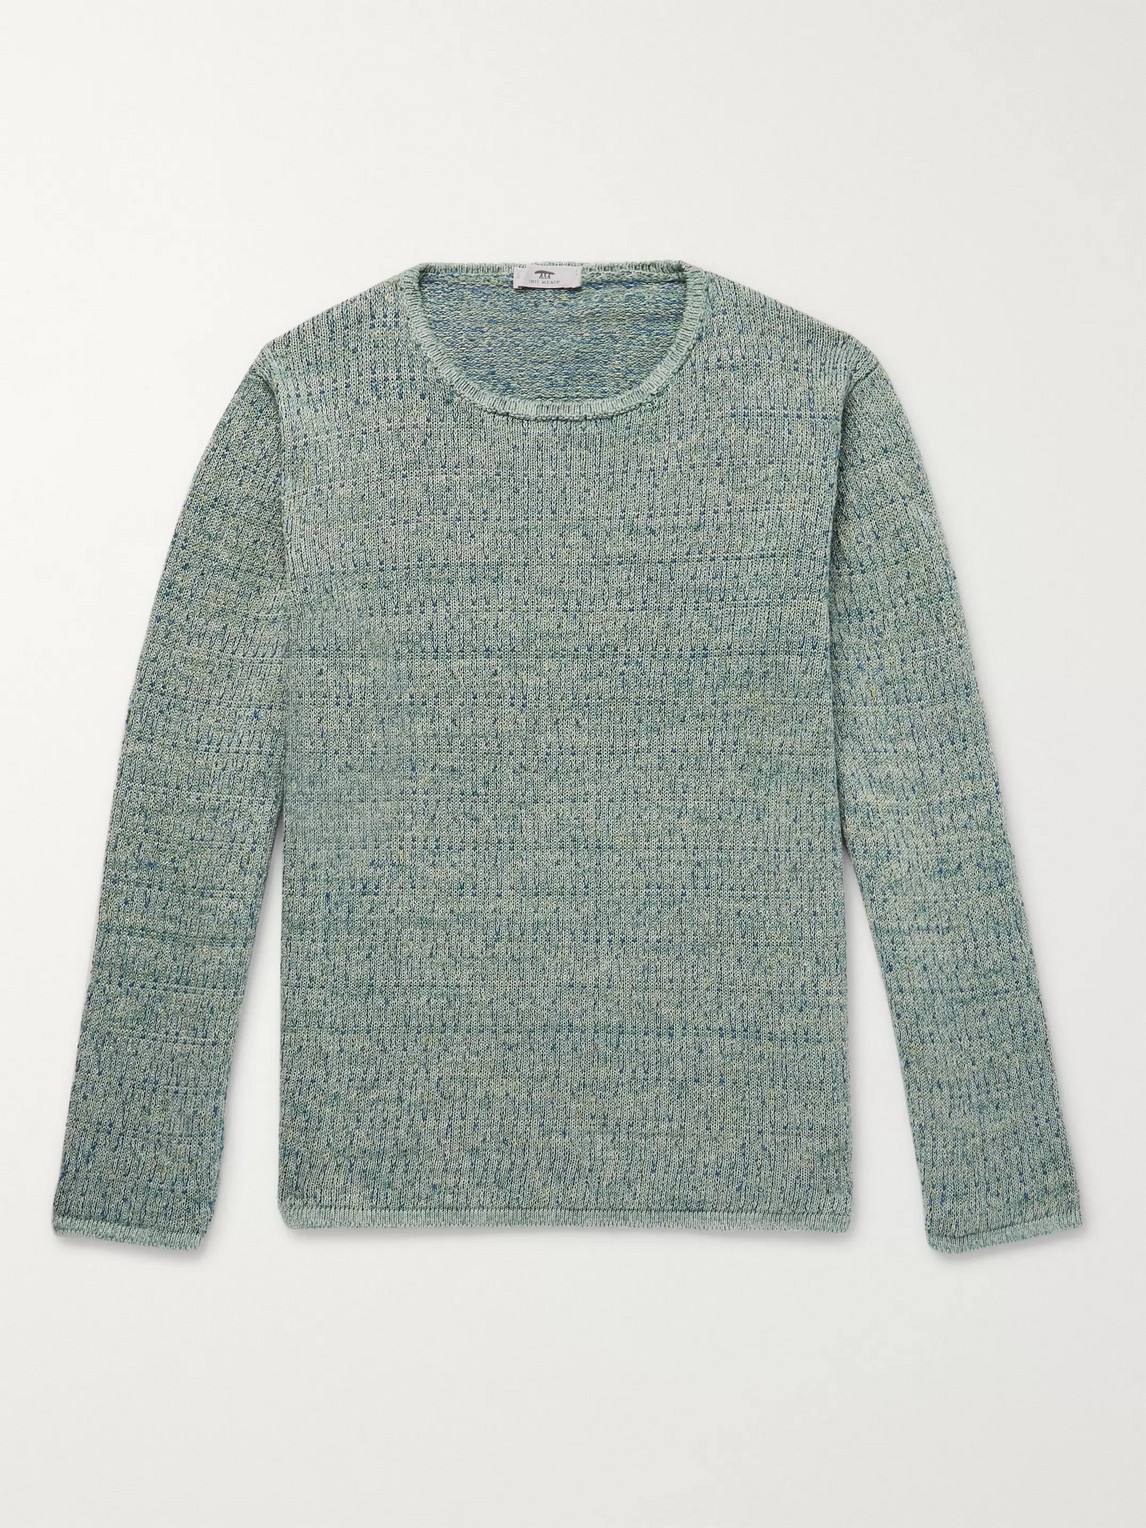 Inis Meain Deora Aille Slim-fit Linen Jumper In Green